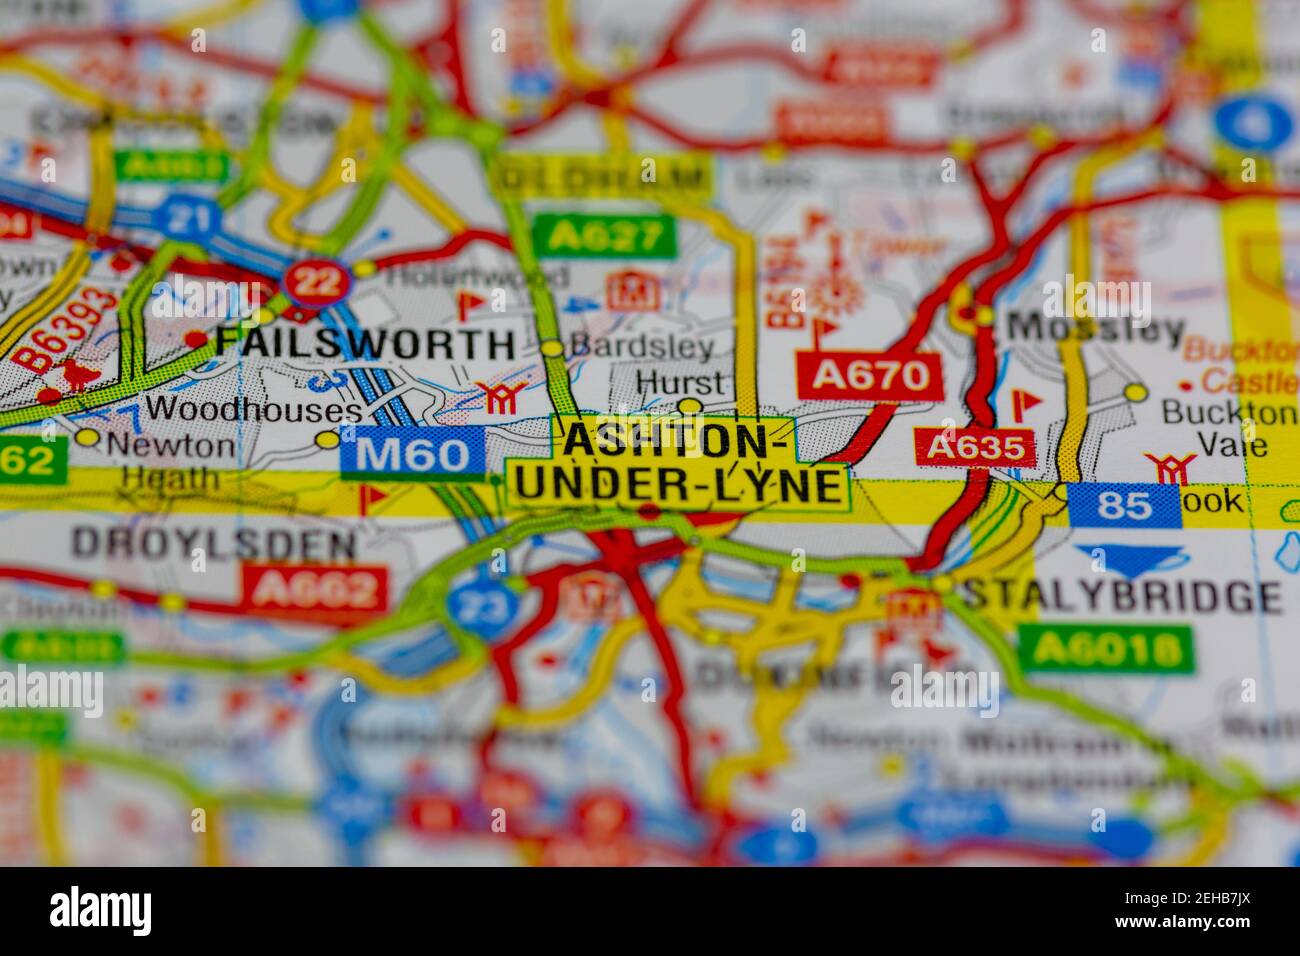 Ashton under lyne and surrounding areas shown on a road map or Geography map Stock Photo